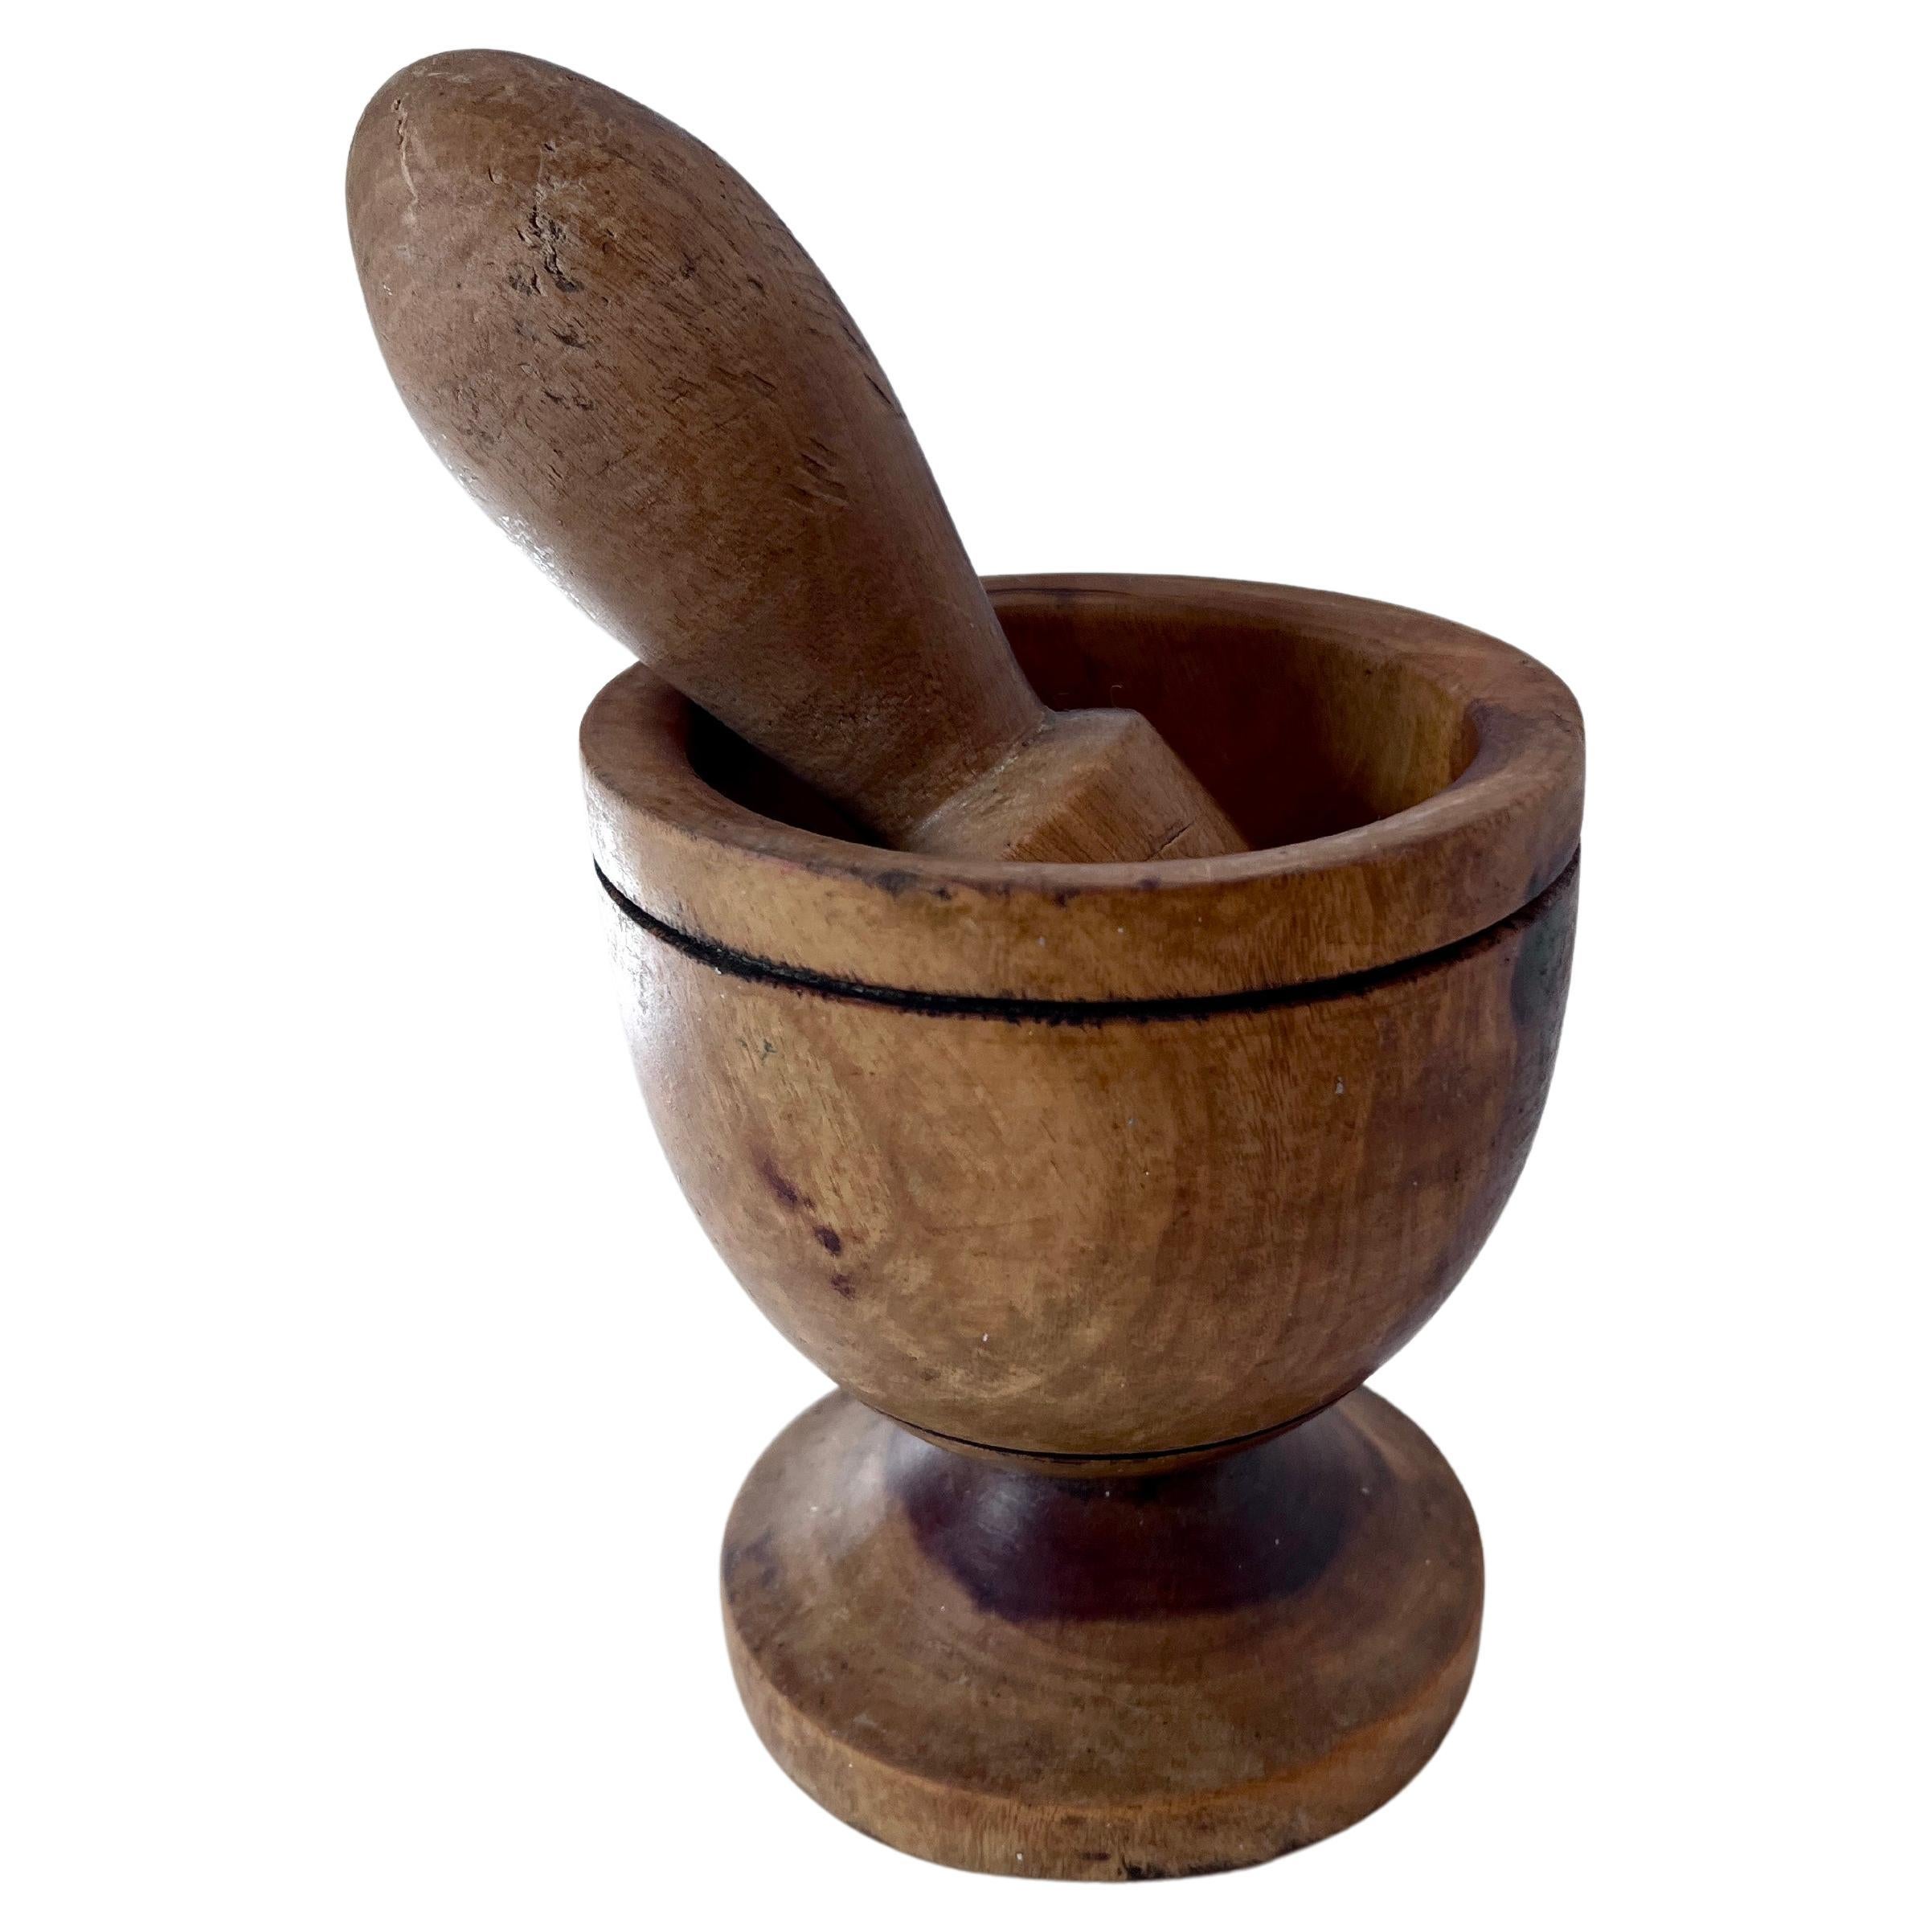 Hand Crafted Wooden Mortar and Pestle